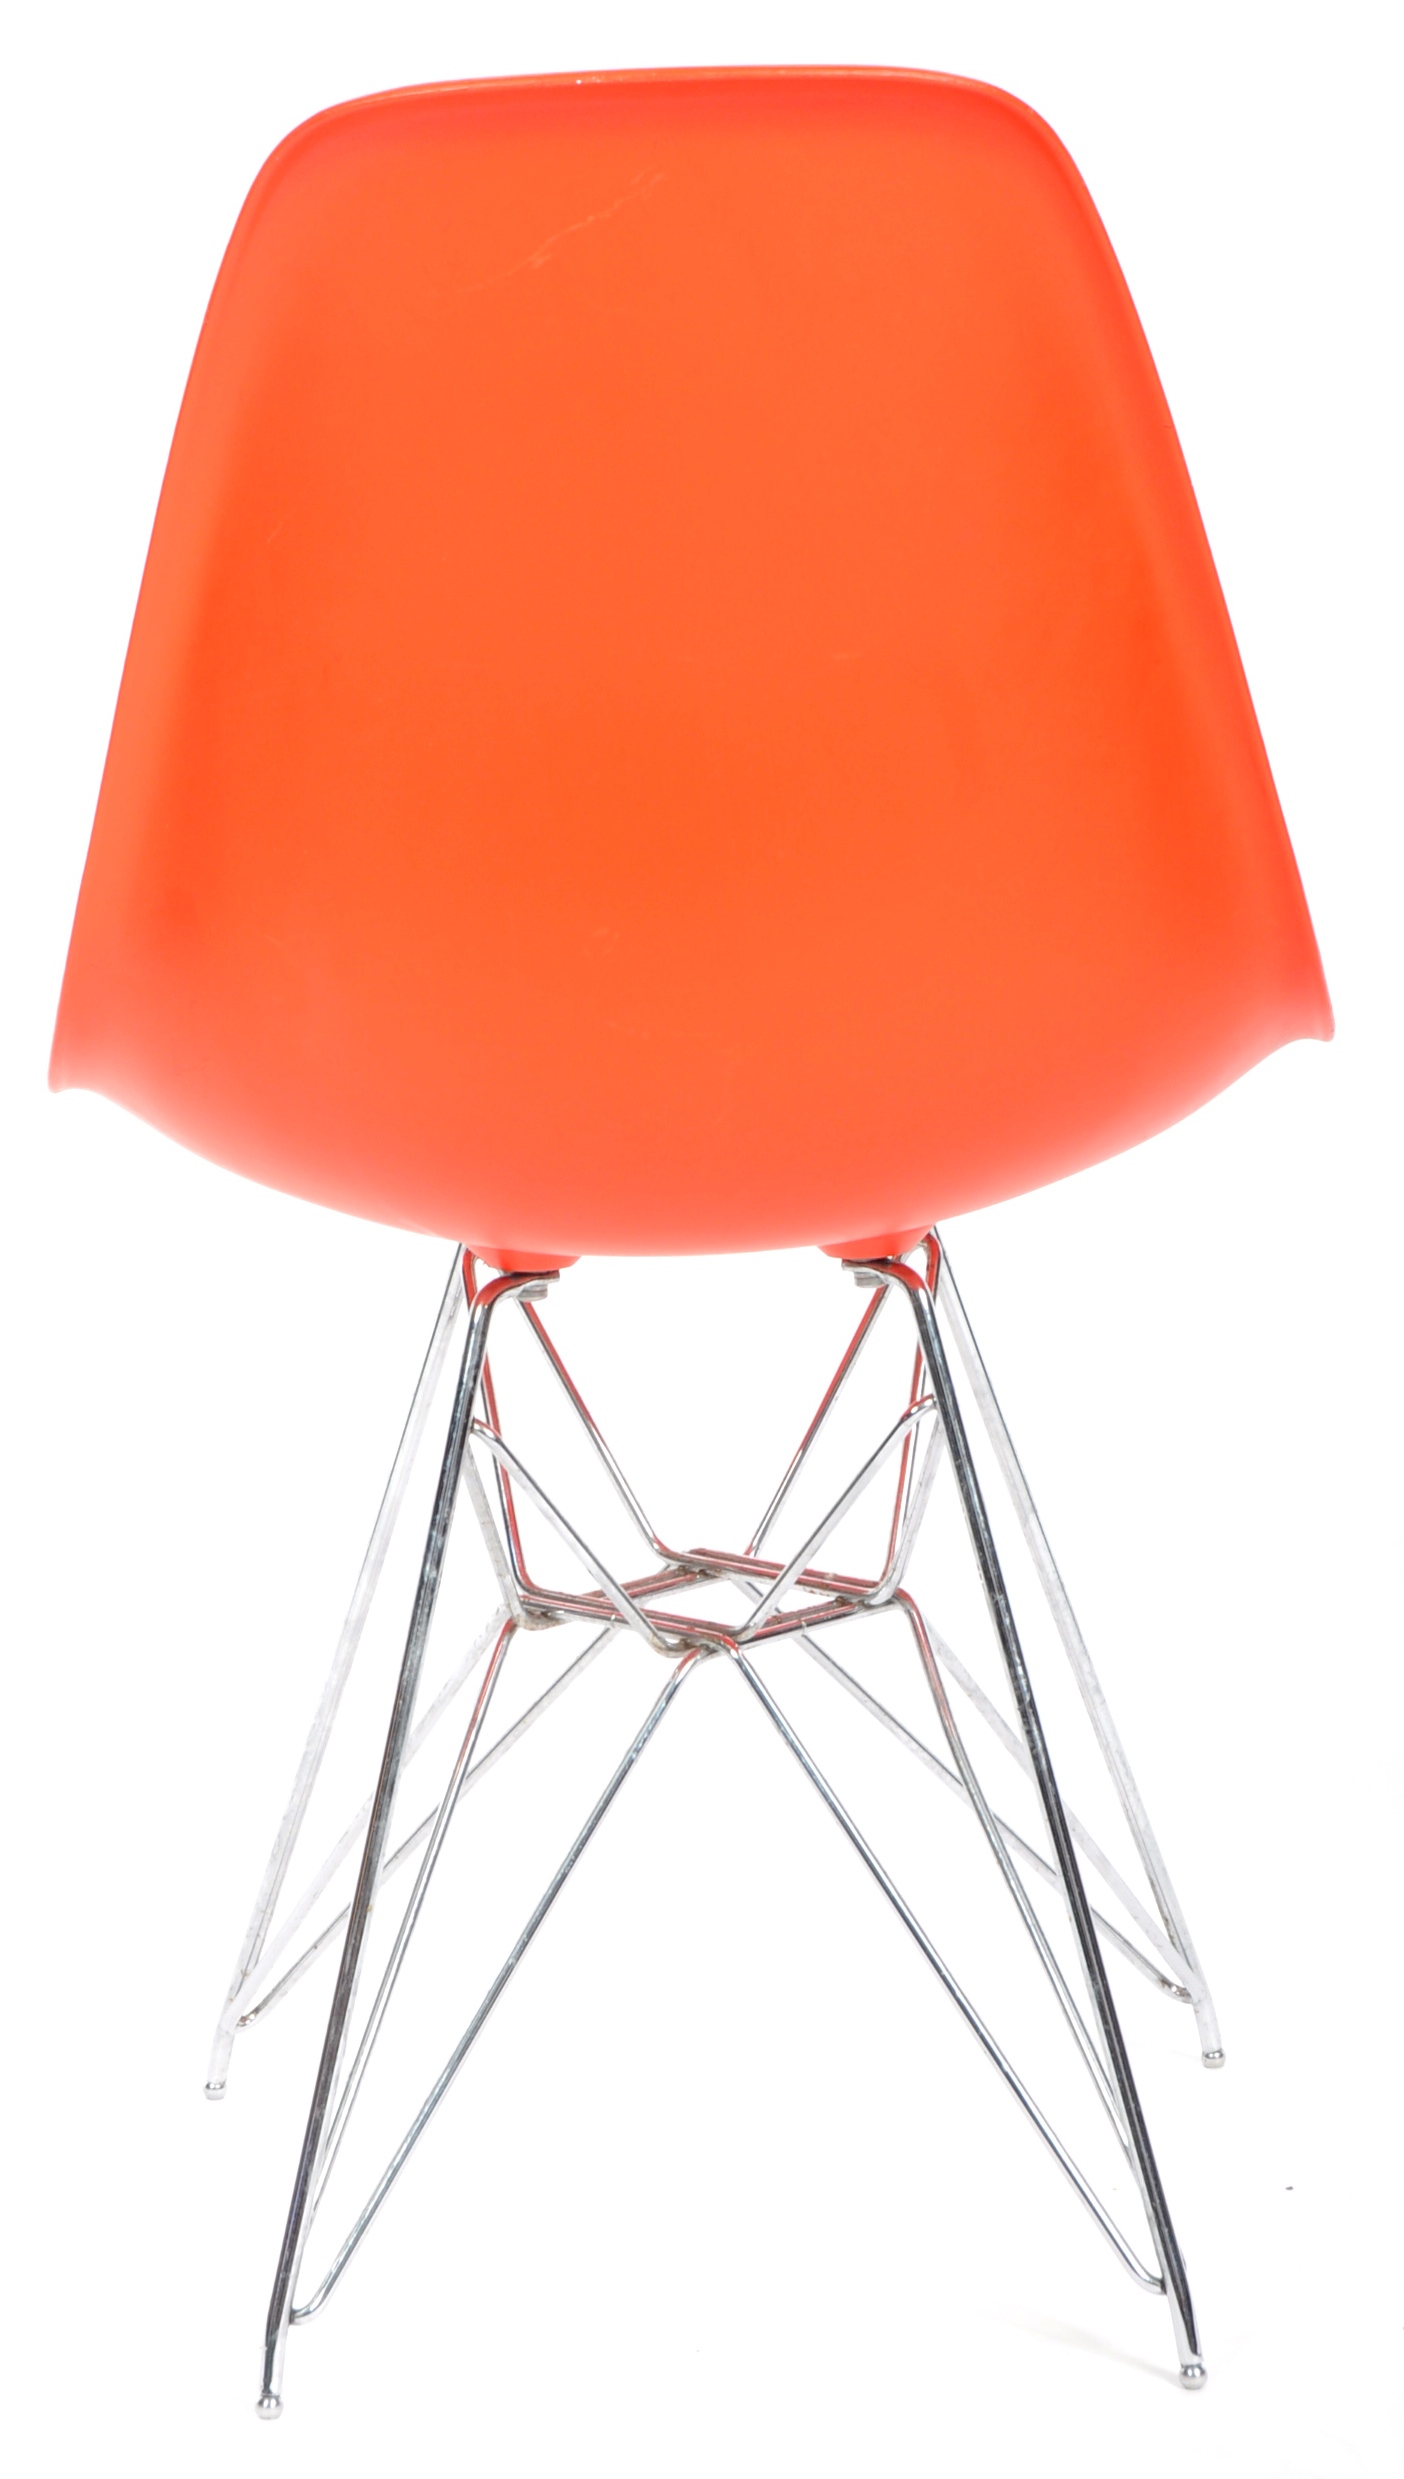 CHARLES & RAY EAMES FOR VITRA - DSR EAMES PLASTIC CHAIR - Image 7 of 10